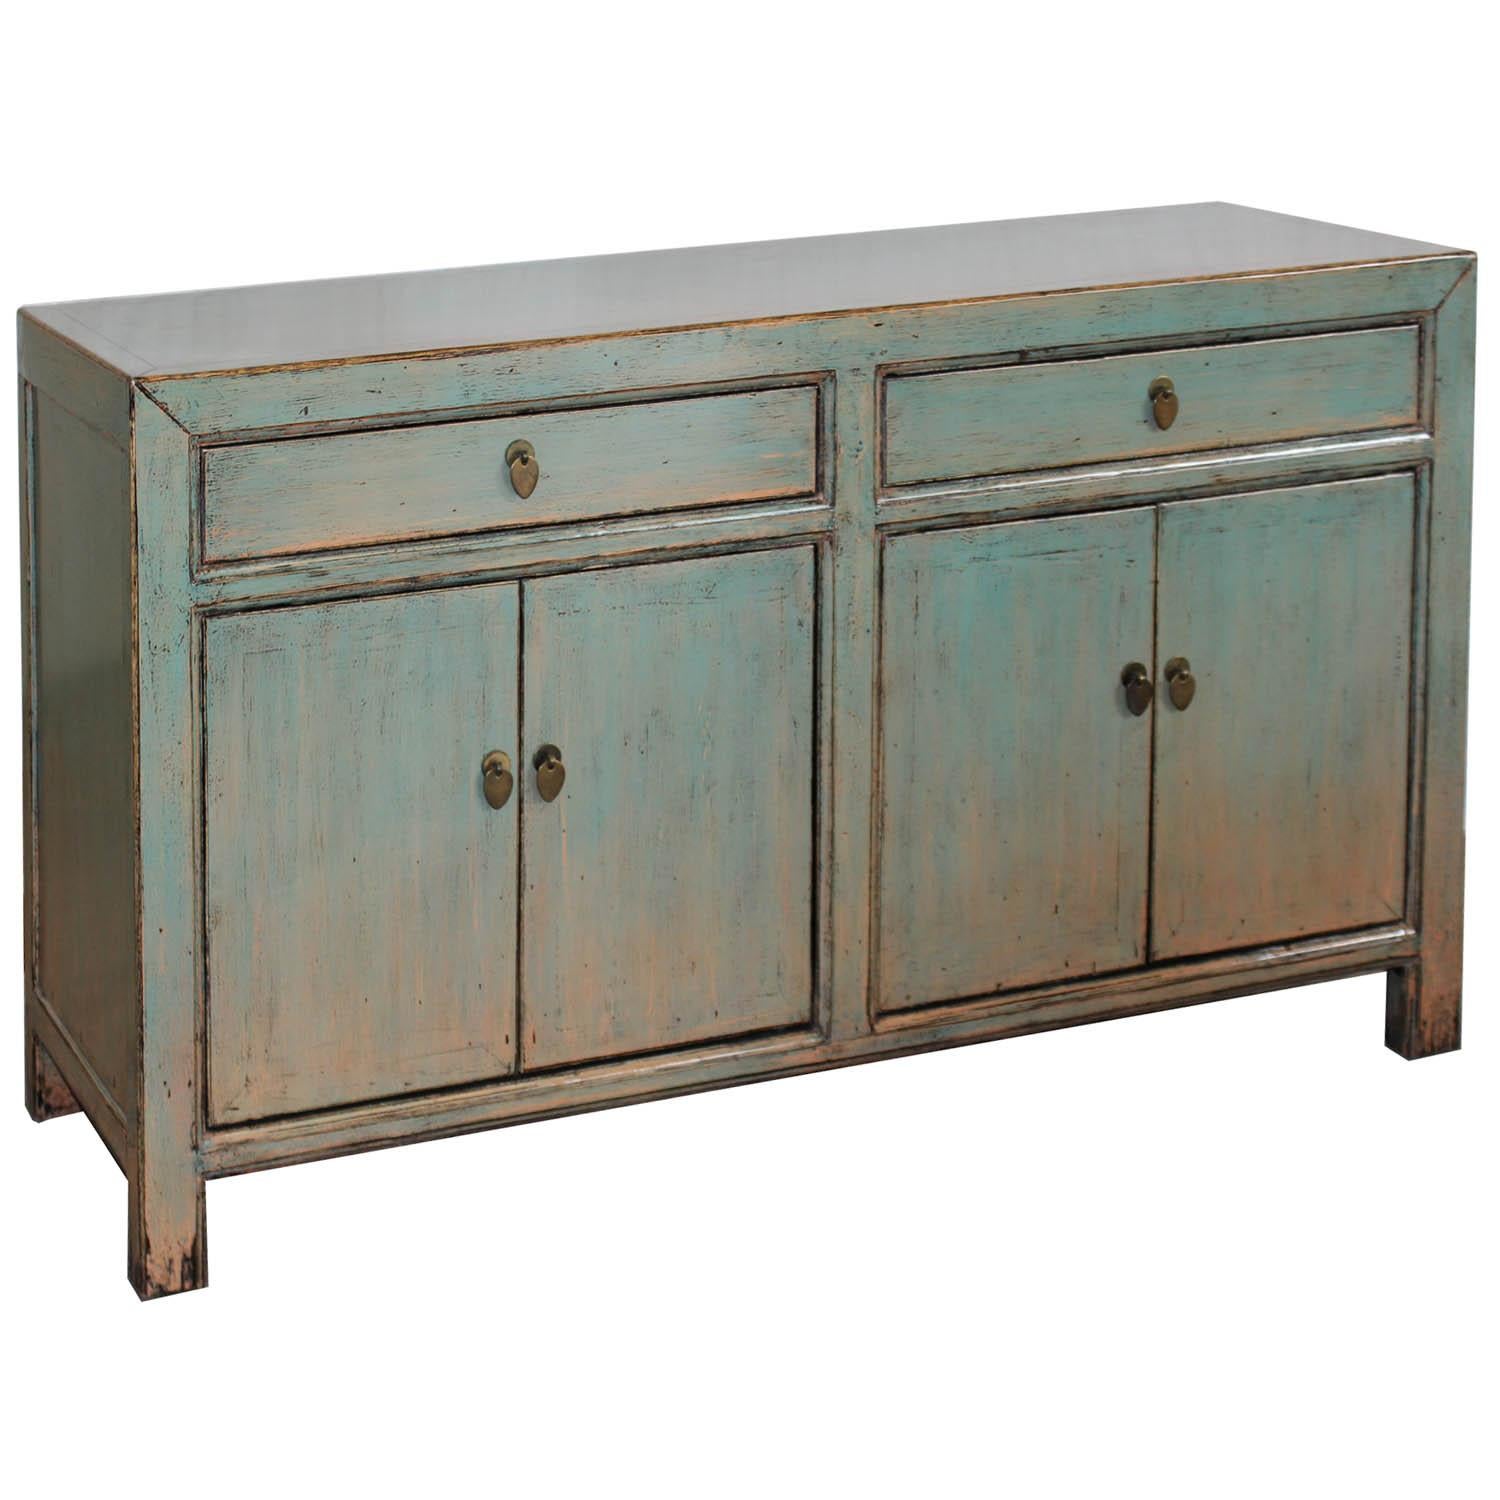 Contemporary green/blue lacquer buffet with two drawers and clean lines can be used in an entry way or living room beneath artwork.